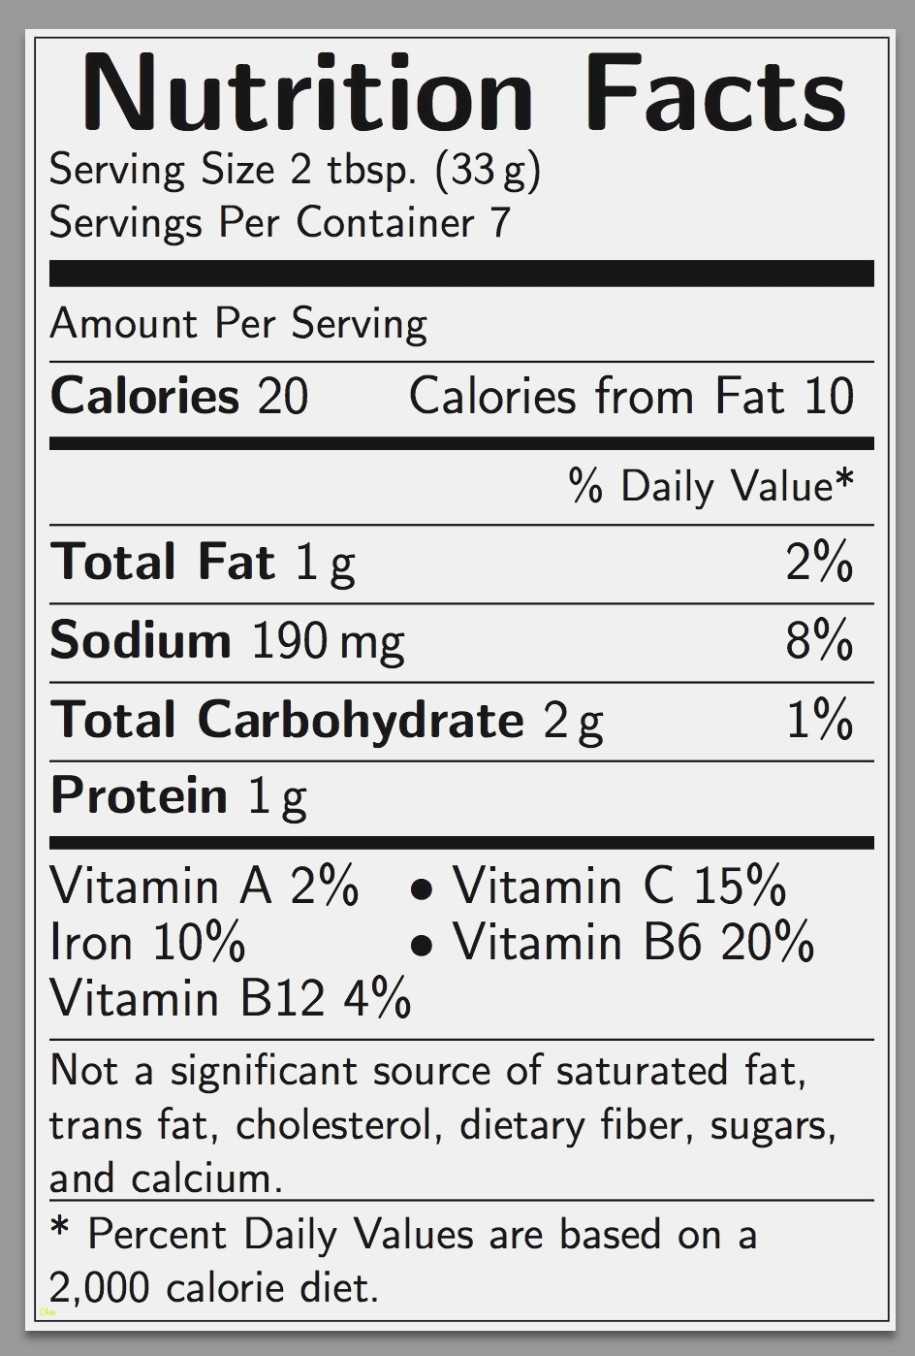 Nutrition Facts Label Template Awesome Blank Nutrition Label Inside Blank Food Label Template